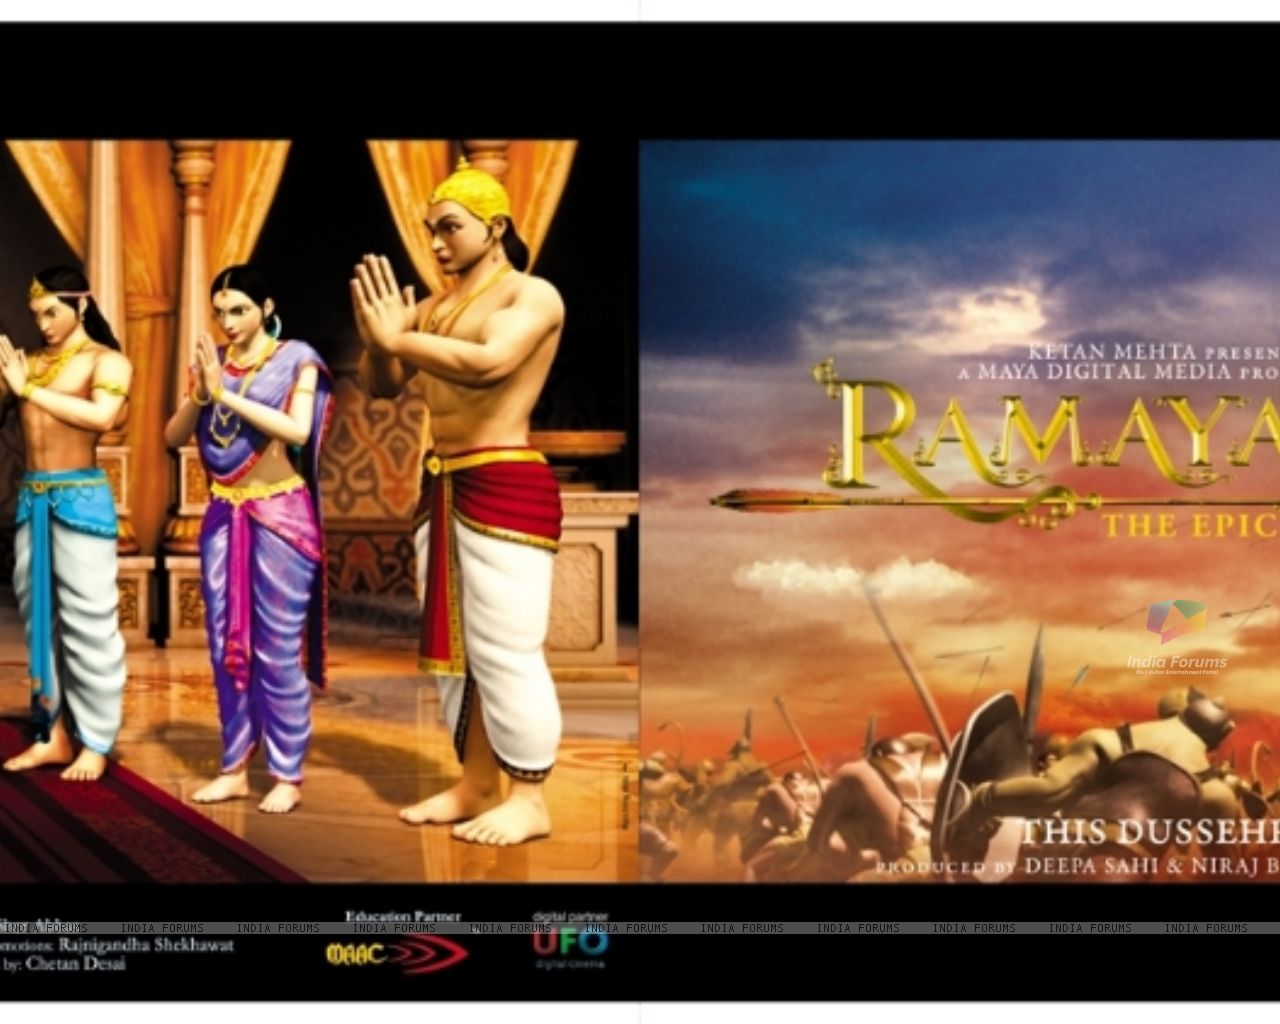 Wallpaper Of The Movie Ramayana Epic Size